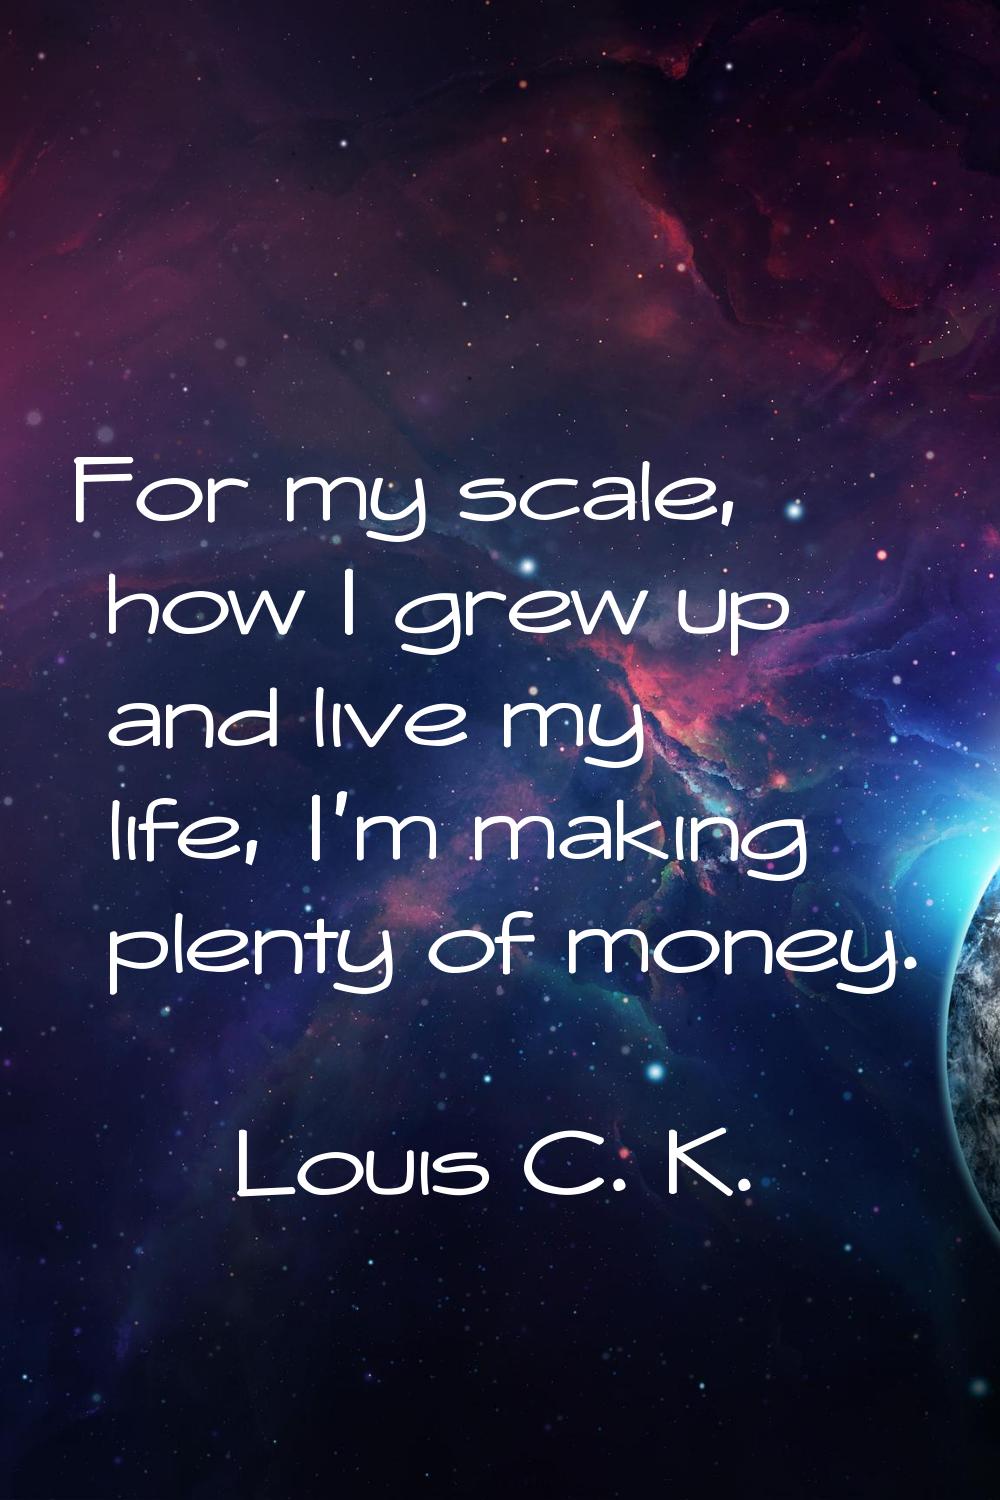 For my scale, how I grew up and live my life, I'm making plenty of money.